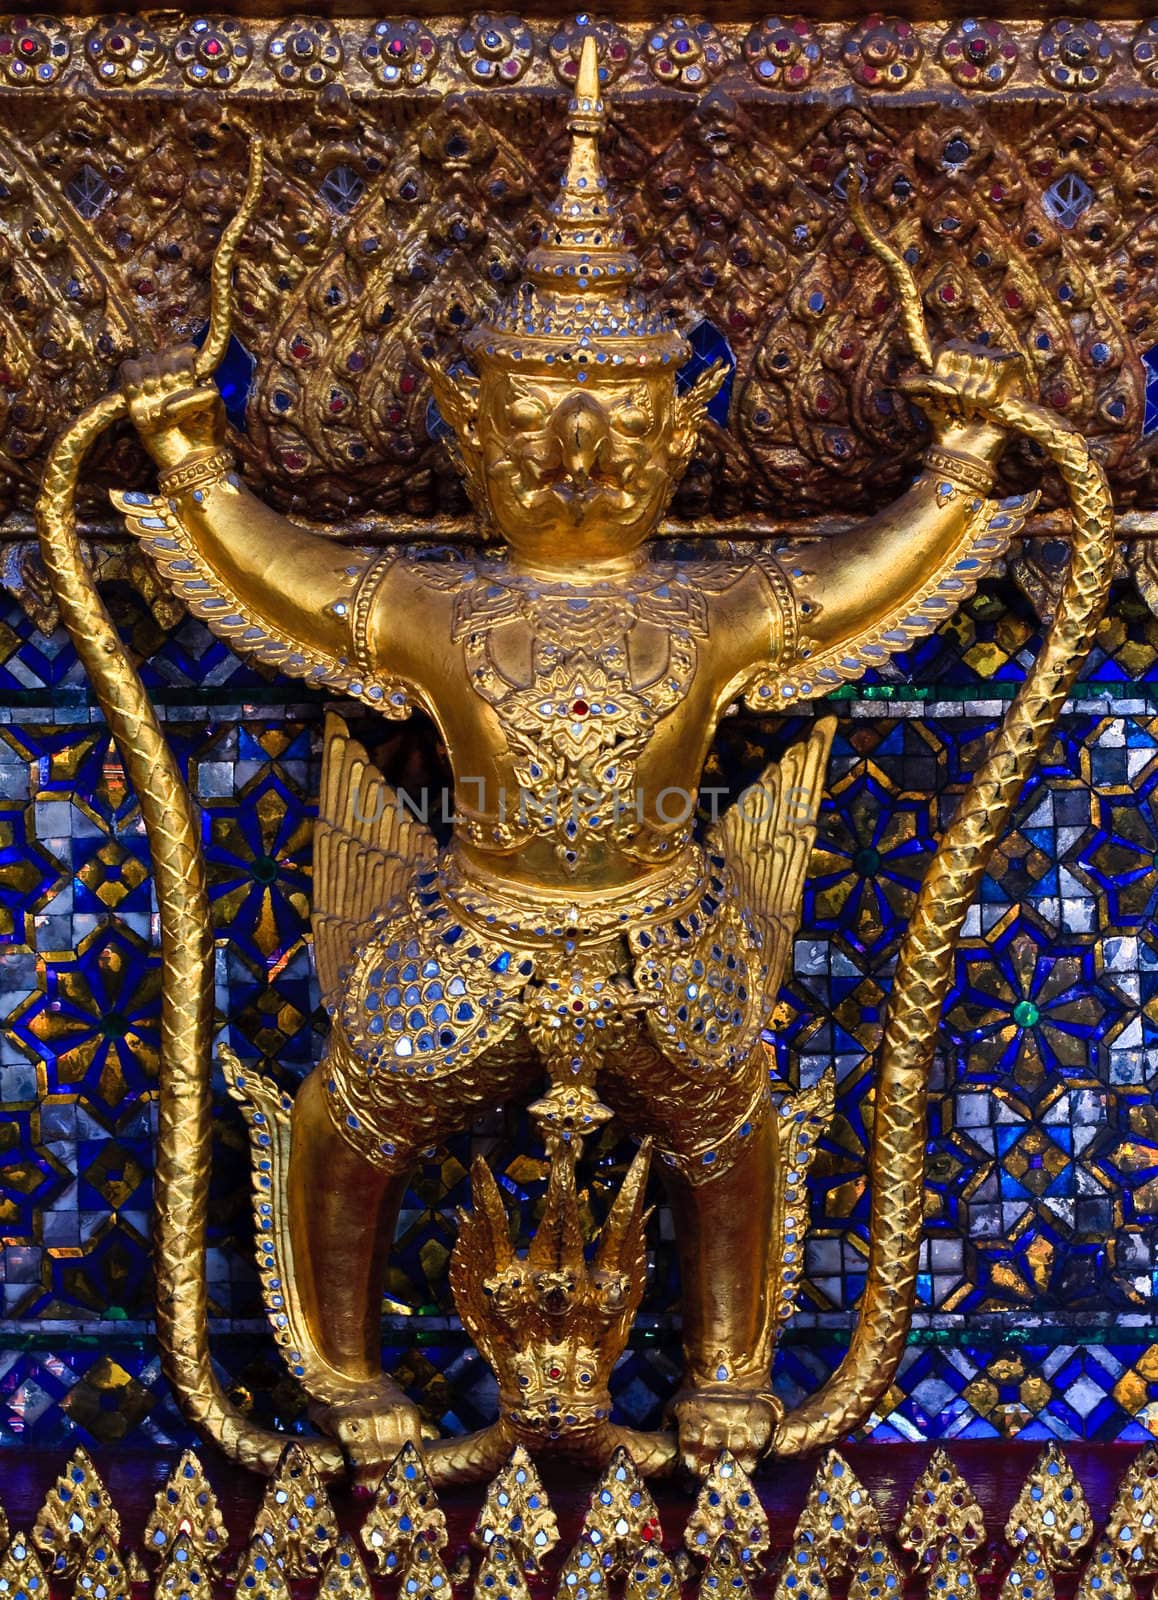 Golden garuda decorated for chuch in temple of emerald Buddha